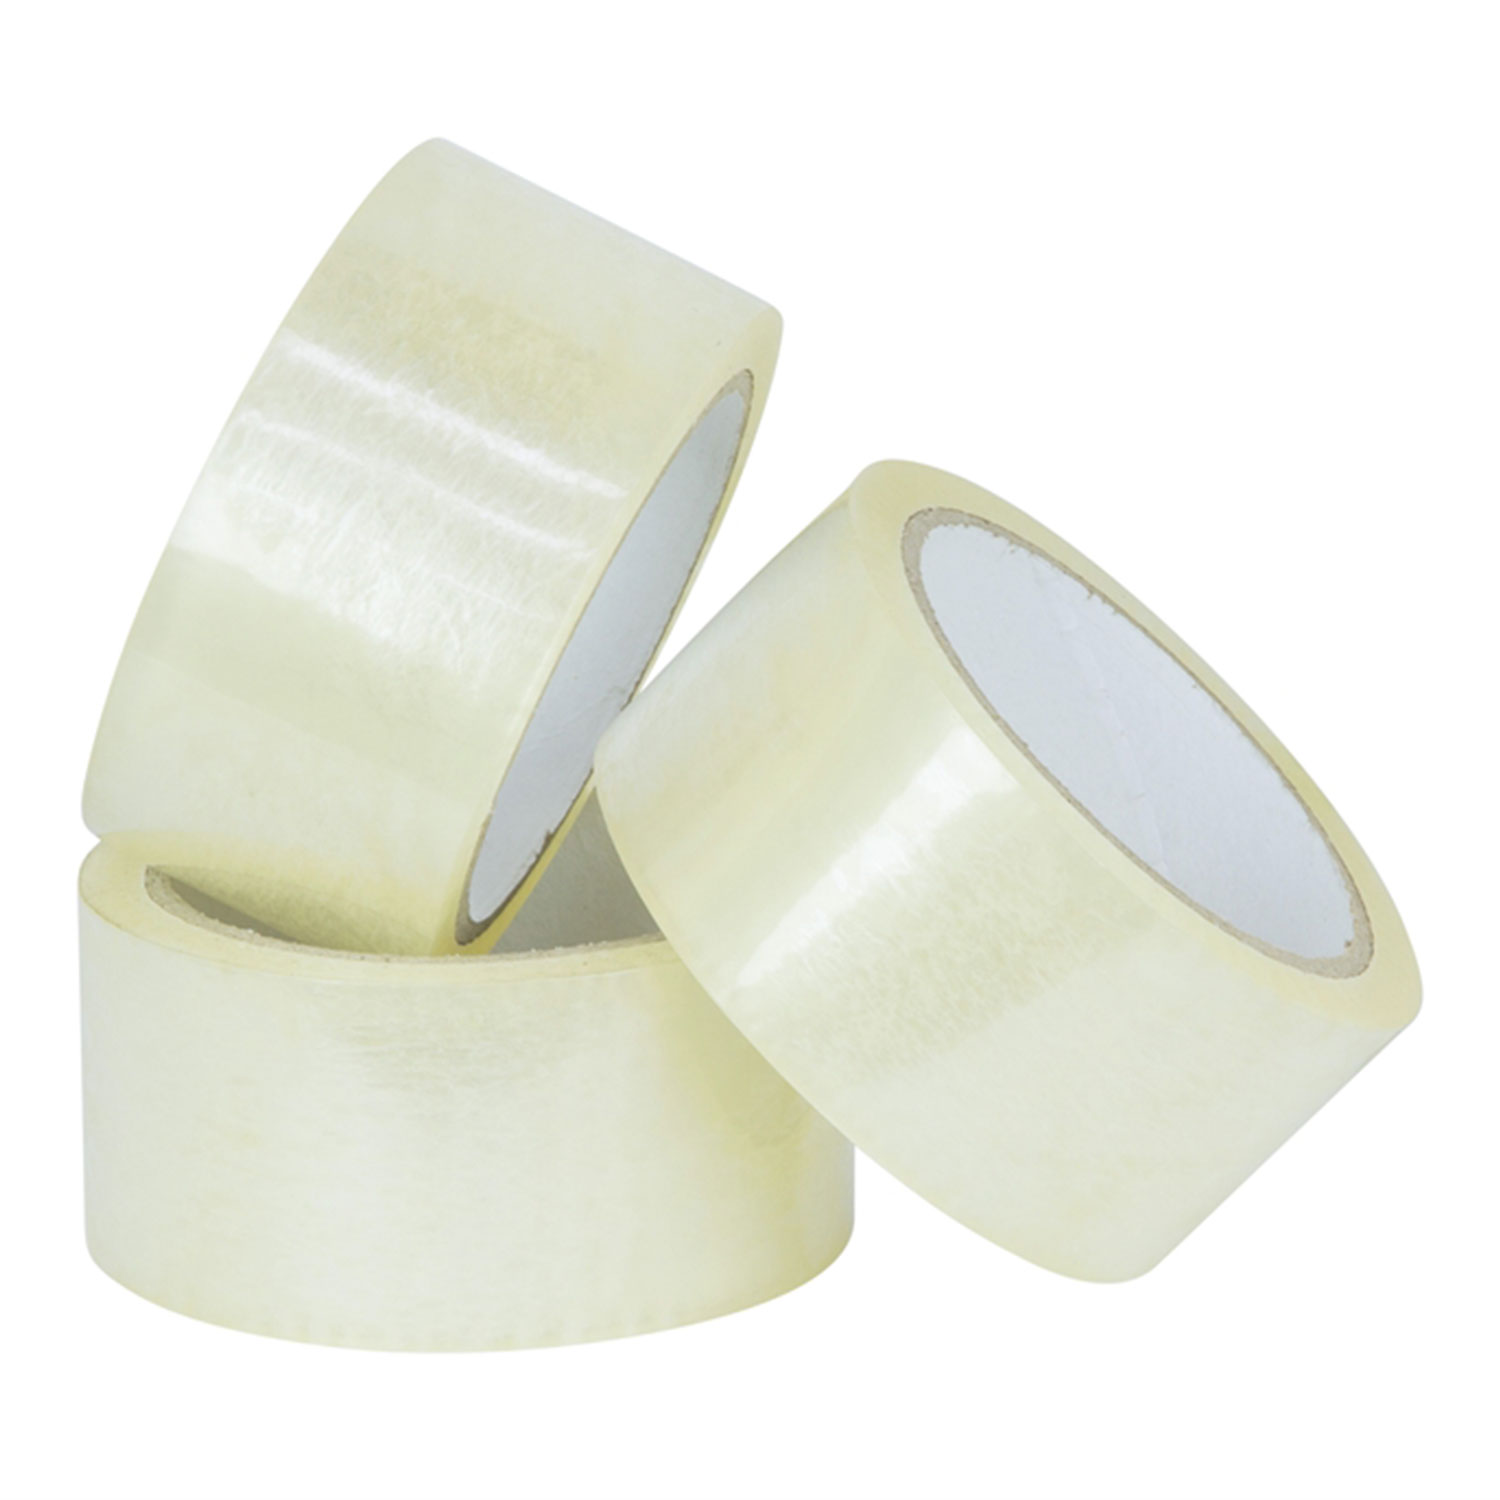 Clear Tape – Palmer Safety